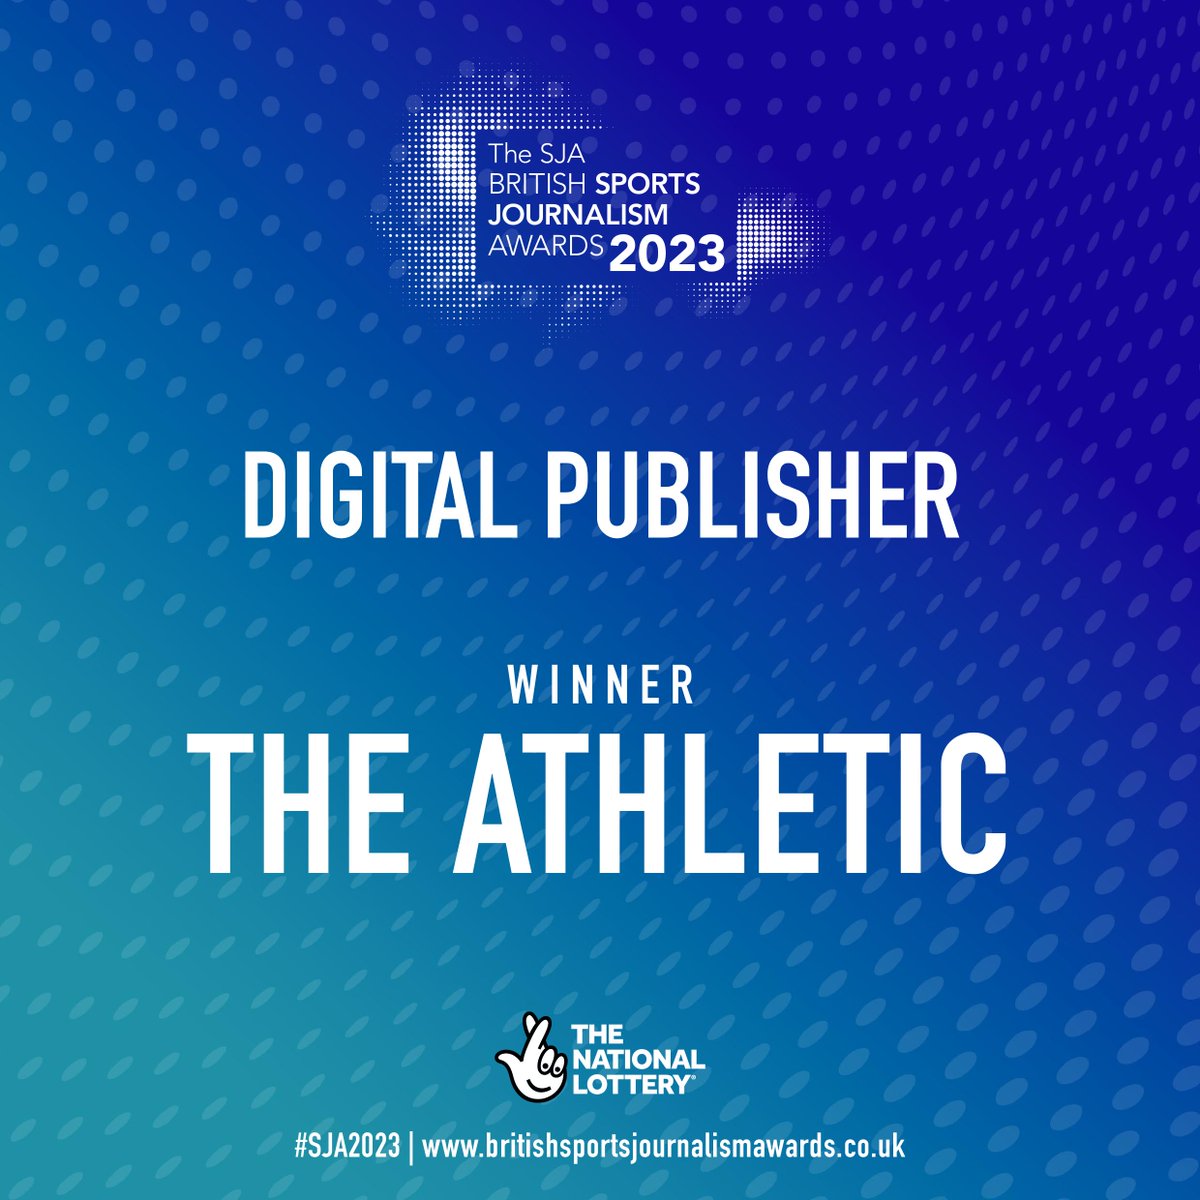 Next up, it's the Digital Sports Publisher of the Year Award, and the winner is @TheAthleticFC! Judges highlighted that their exclusives set the agenda for weeks. #SJA2023